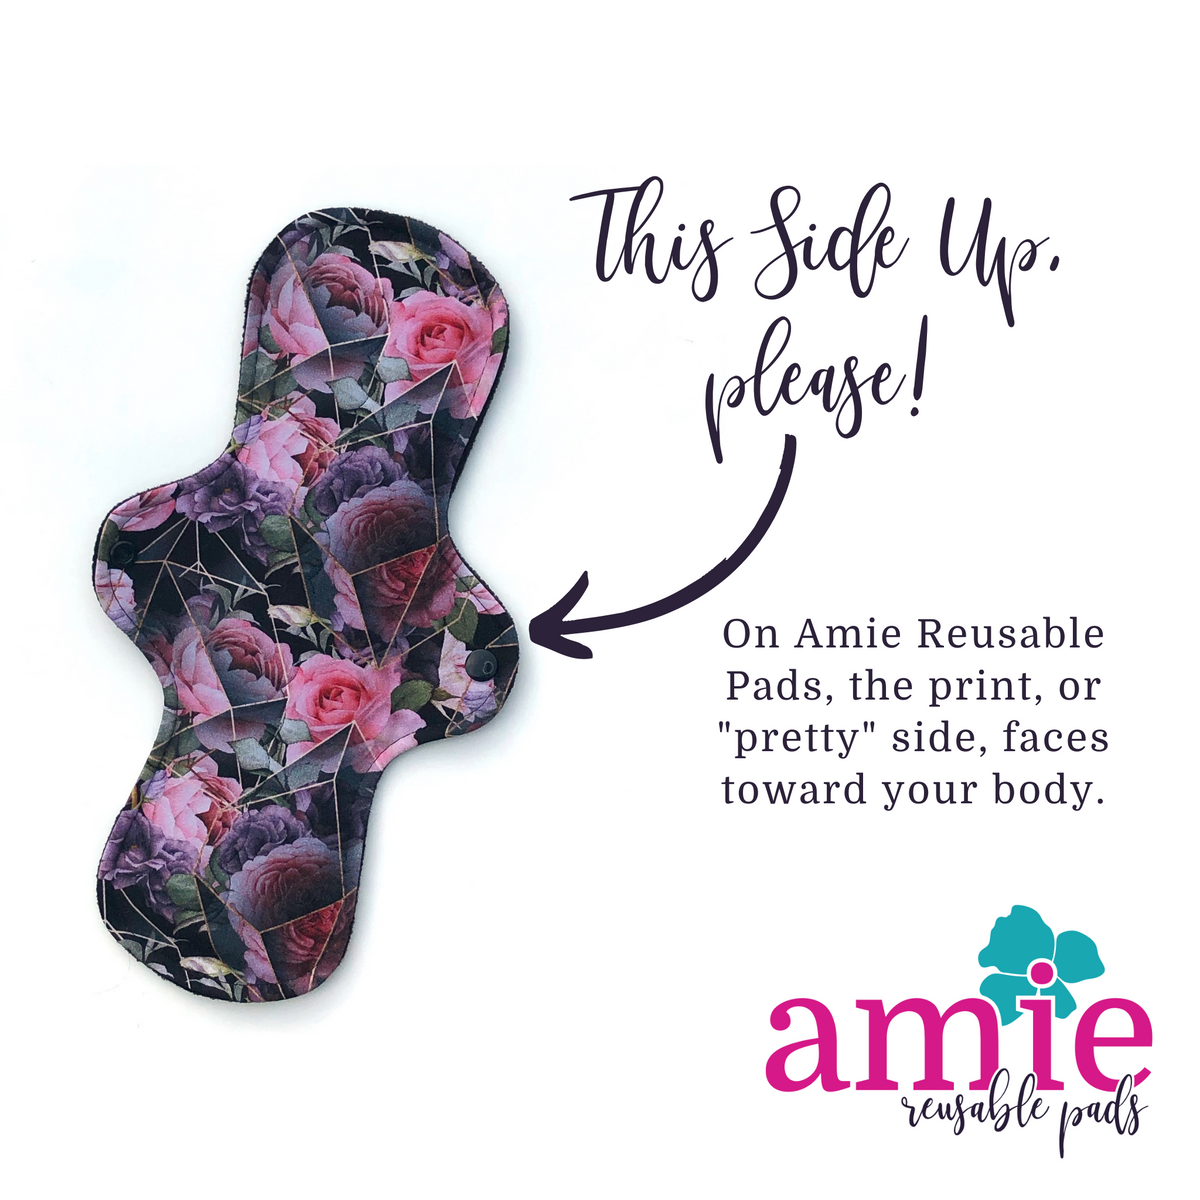 Instruction for showing the pretty-side faces up toward your body when using Wishy-Washy Cloth reusable cloth pads